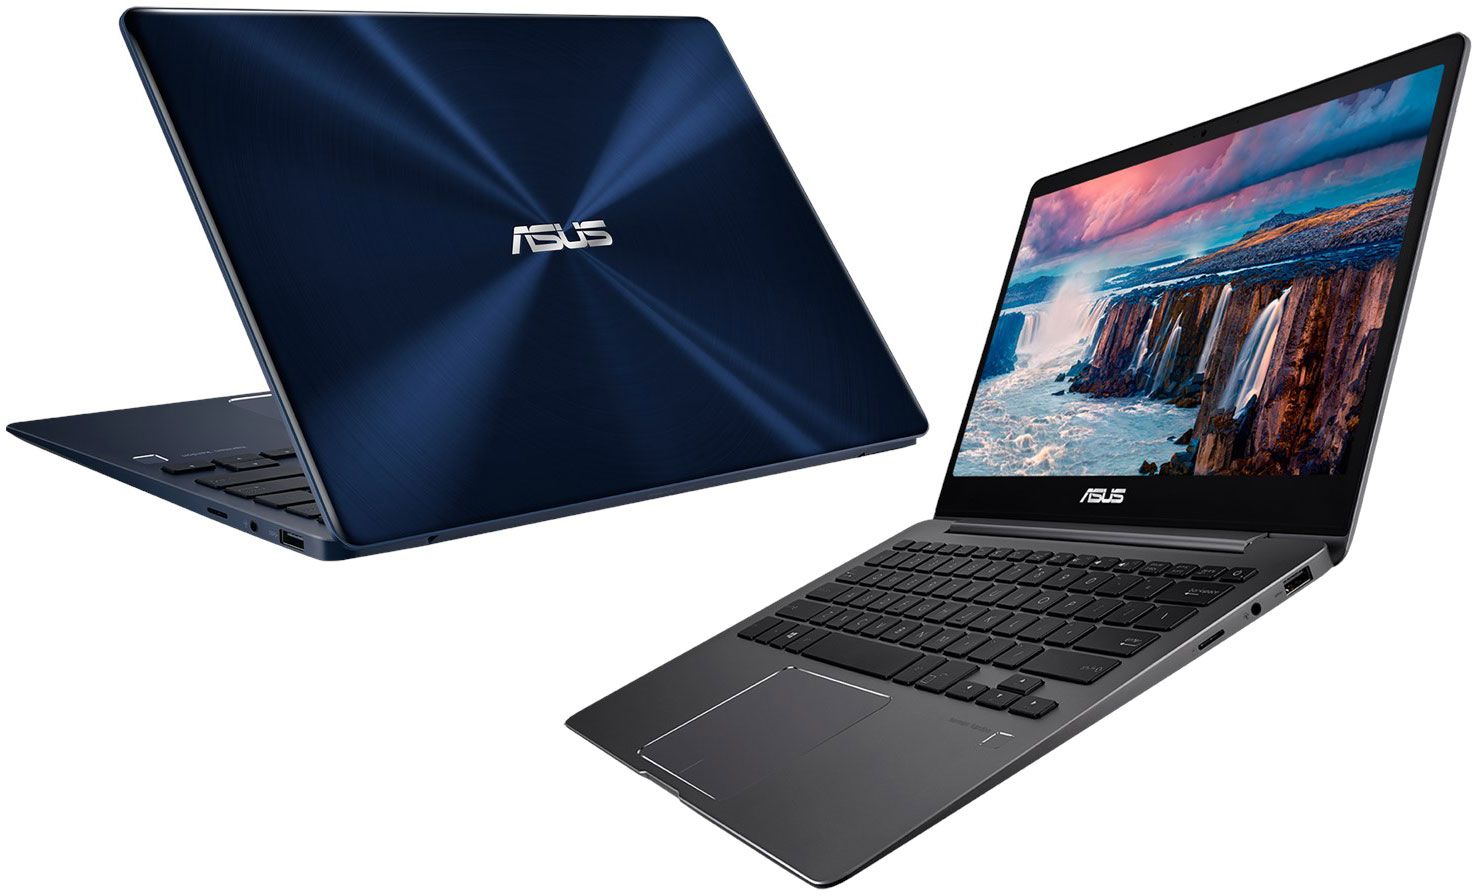 Review of ASUS Zenbook 13 BX333FA and UX331FAL notebooks